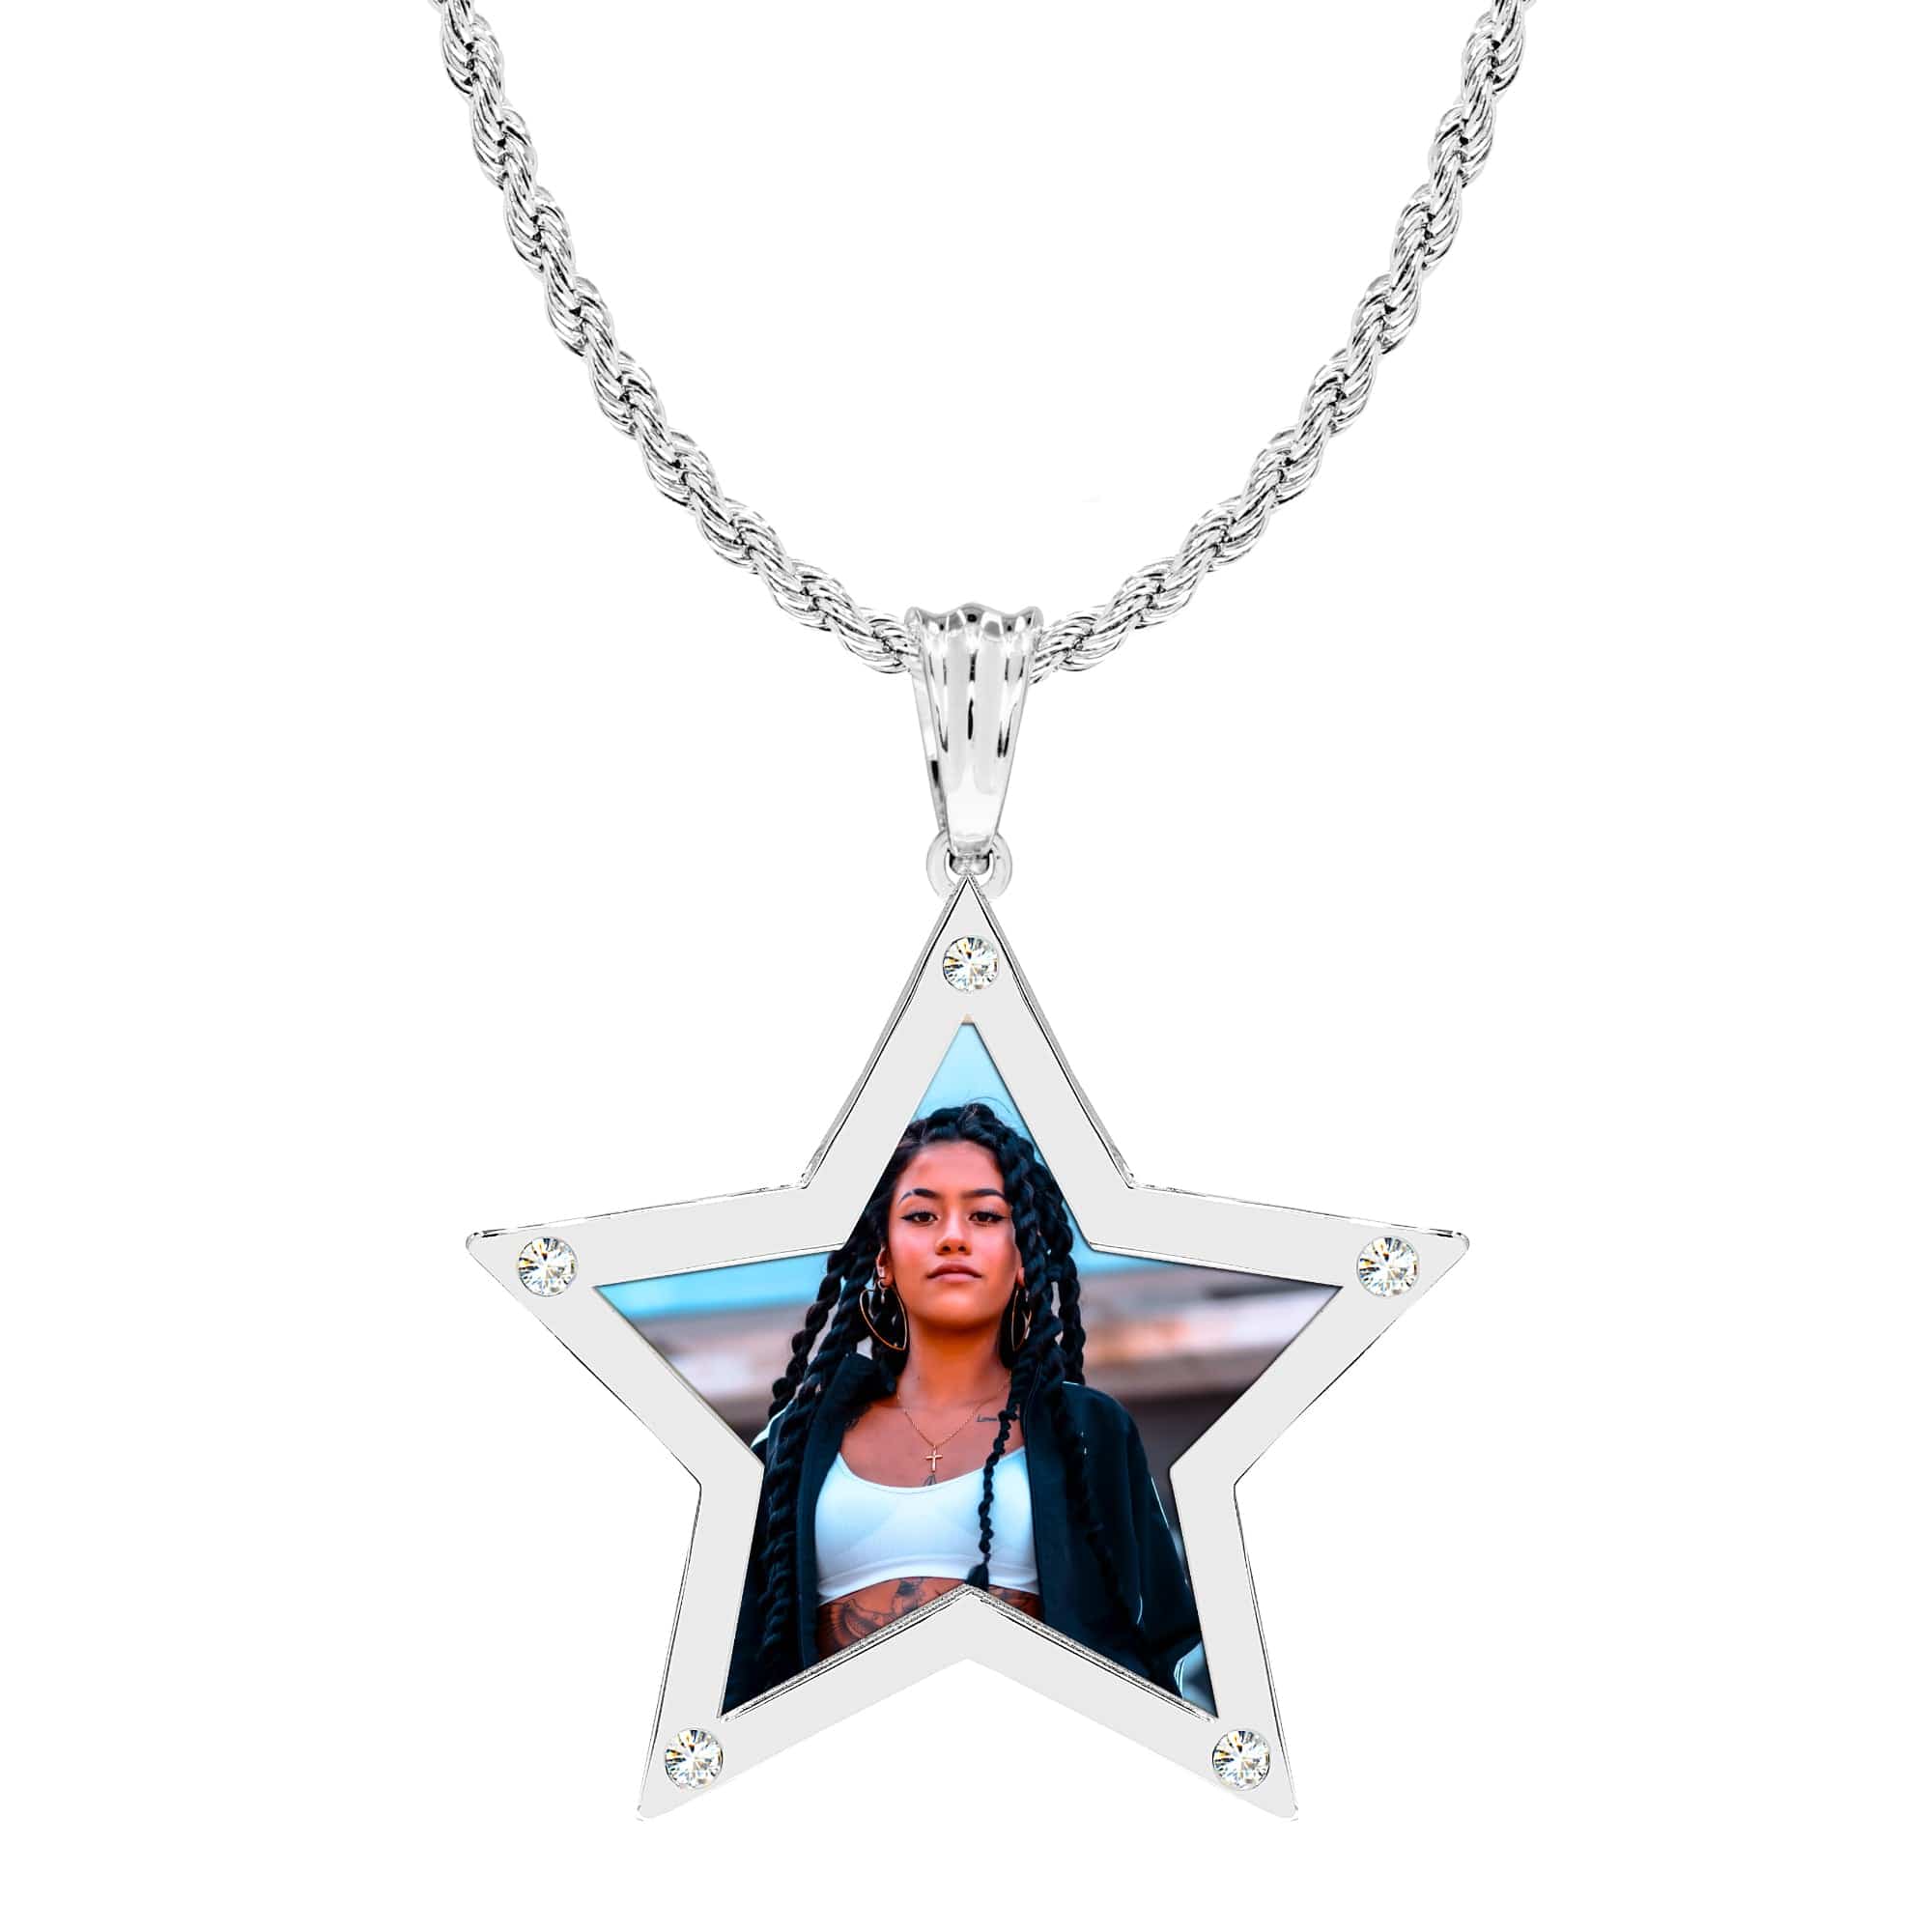 Gold Tone Stainless Steel / Rope Chain Star Shaped Photo Pendant With Zirconia